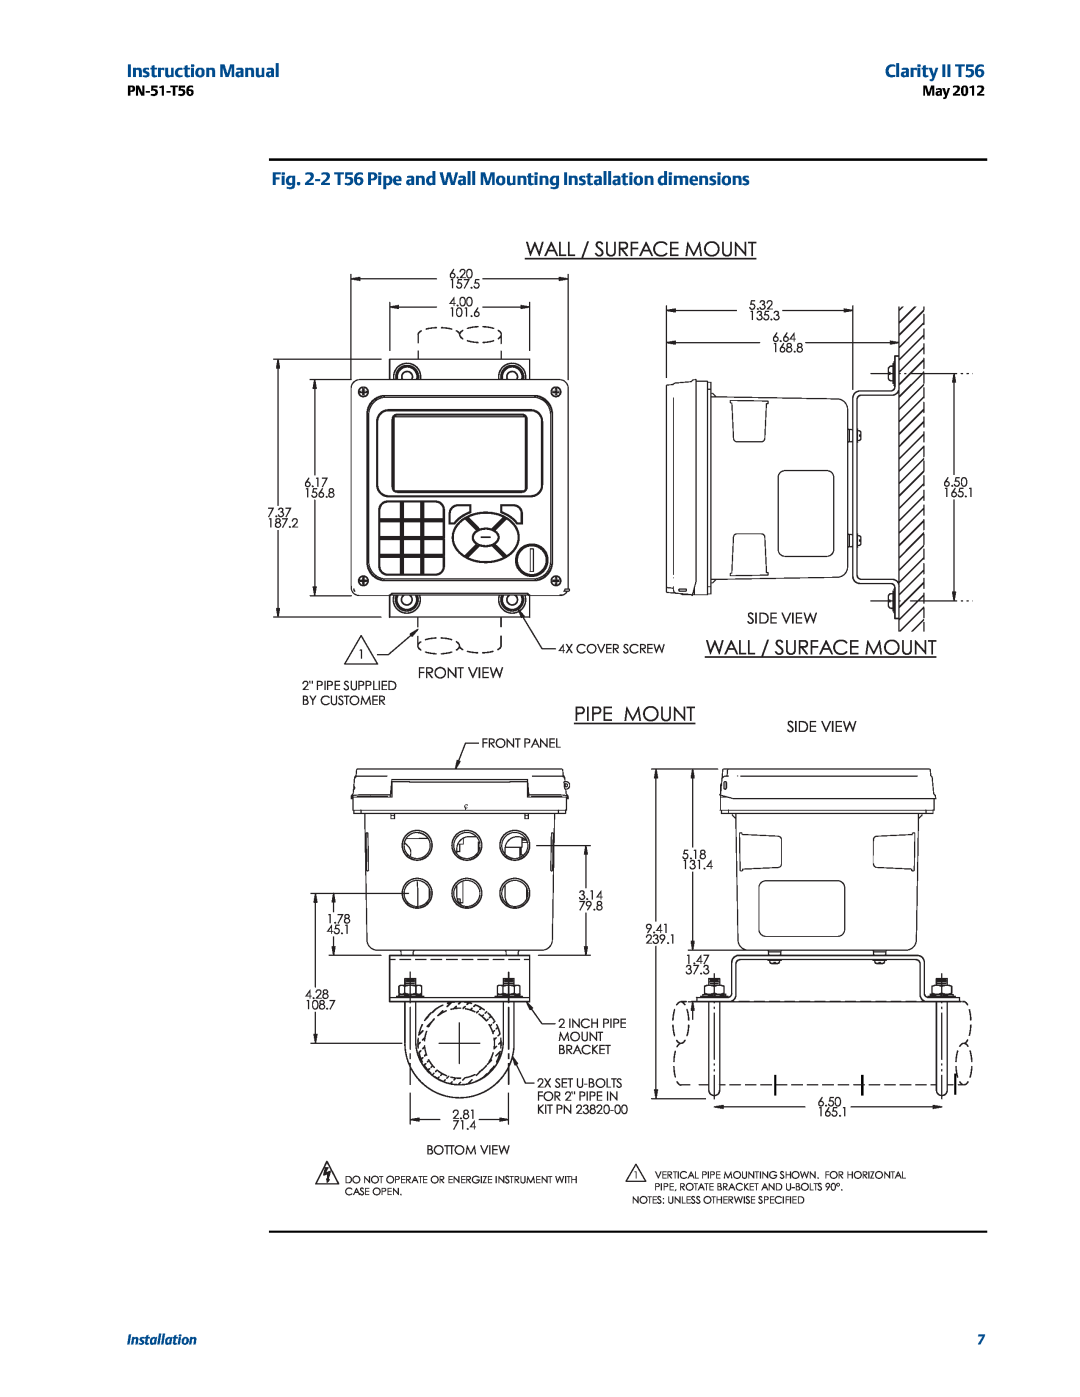 Emerson PN-51-T56 Wall / Surface Mount, 4X COVER SCREW WALL / SURFACE M OUNT, Pipe Mount, Instruction Manual, Installation 